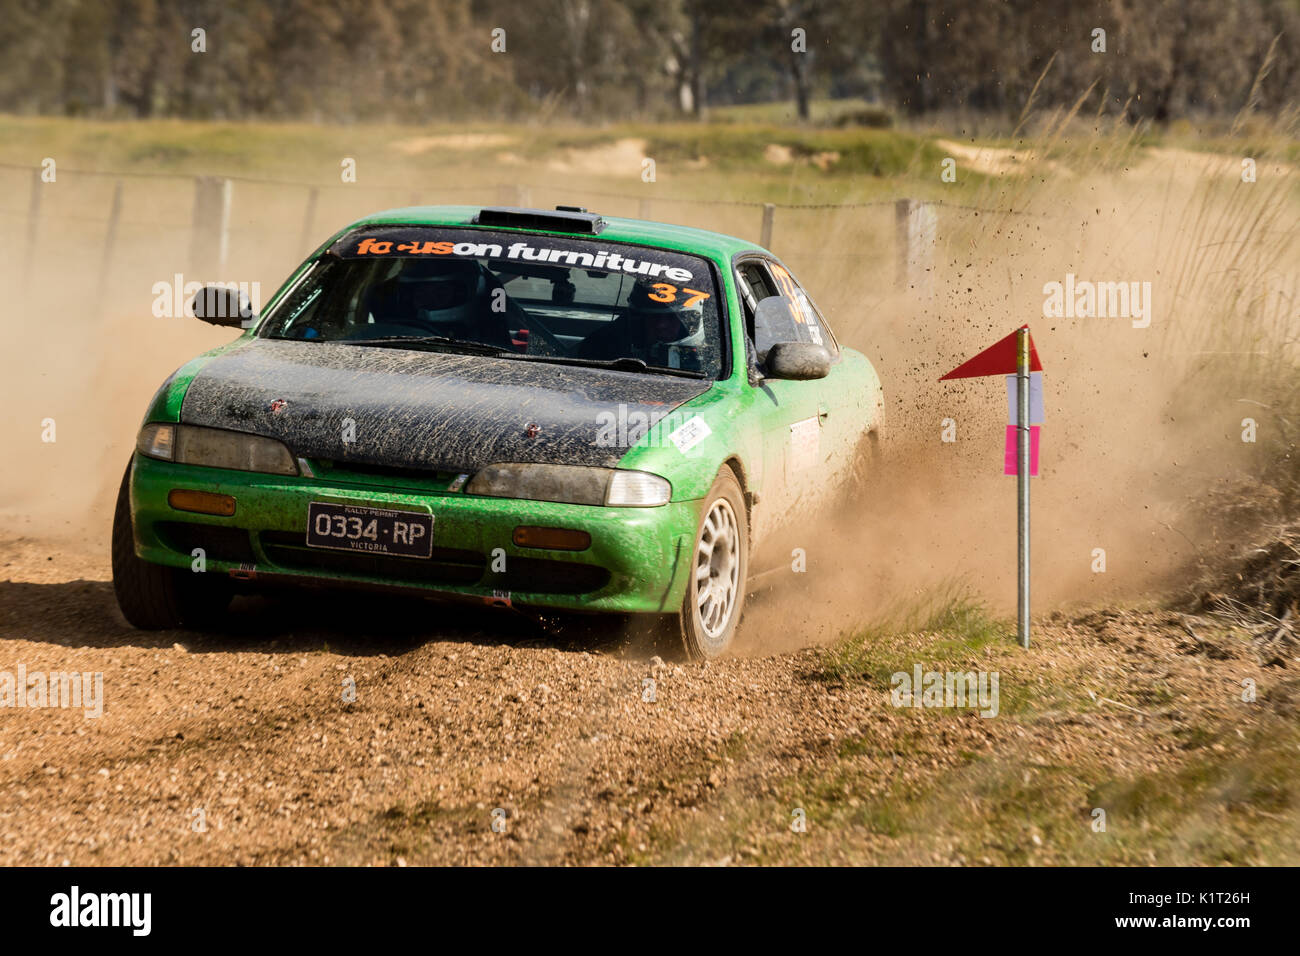 Avoca, Australia. 27th Aug, 2017. MELBOURNE, AUSTRALIA – AUGUST 27: Anthony Lahiff and Doug Fernei in a Nissan 200SX during the 2017 Victorian Rally Championship, Round 3 of the Leechs Mitsubishi Pyrenees Rush, Australia on August 27 2017. Credit: Dave Hewison Sports/Alamy Live News Stock Photo